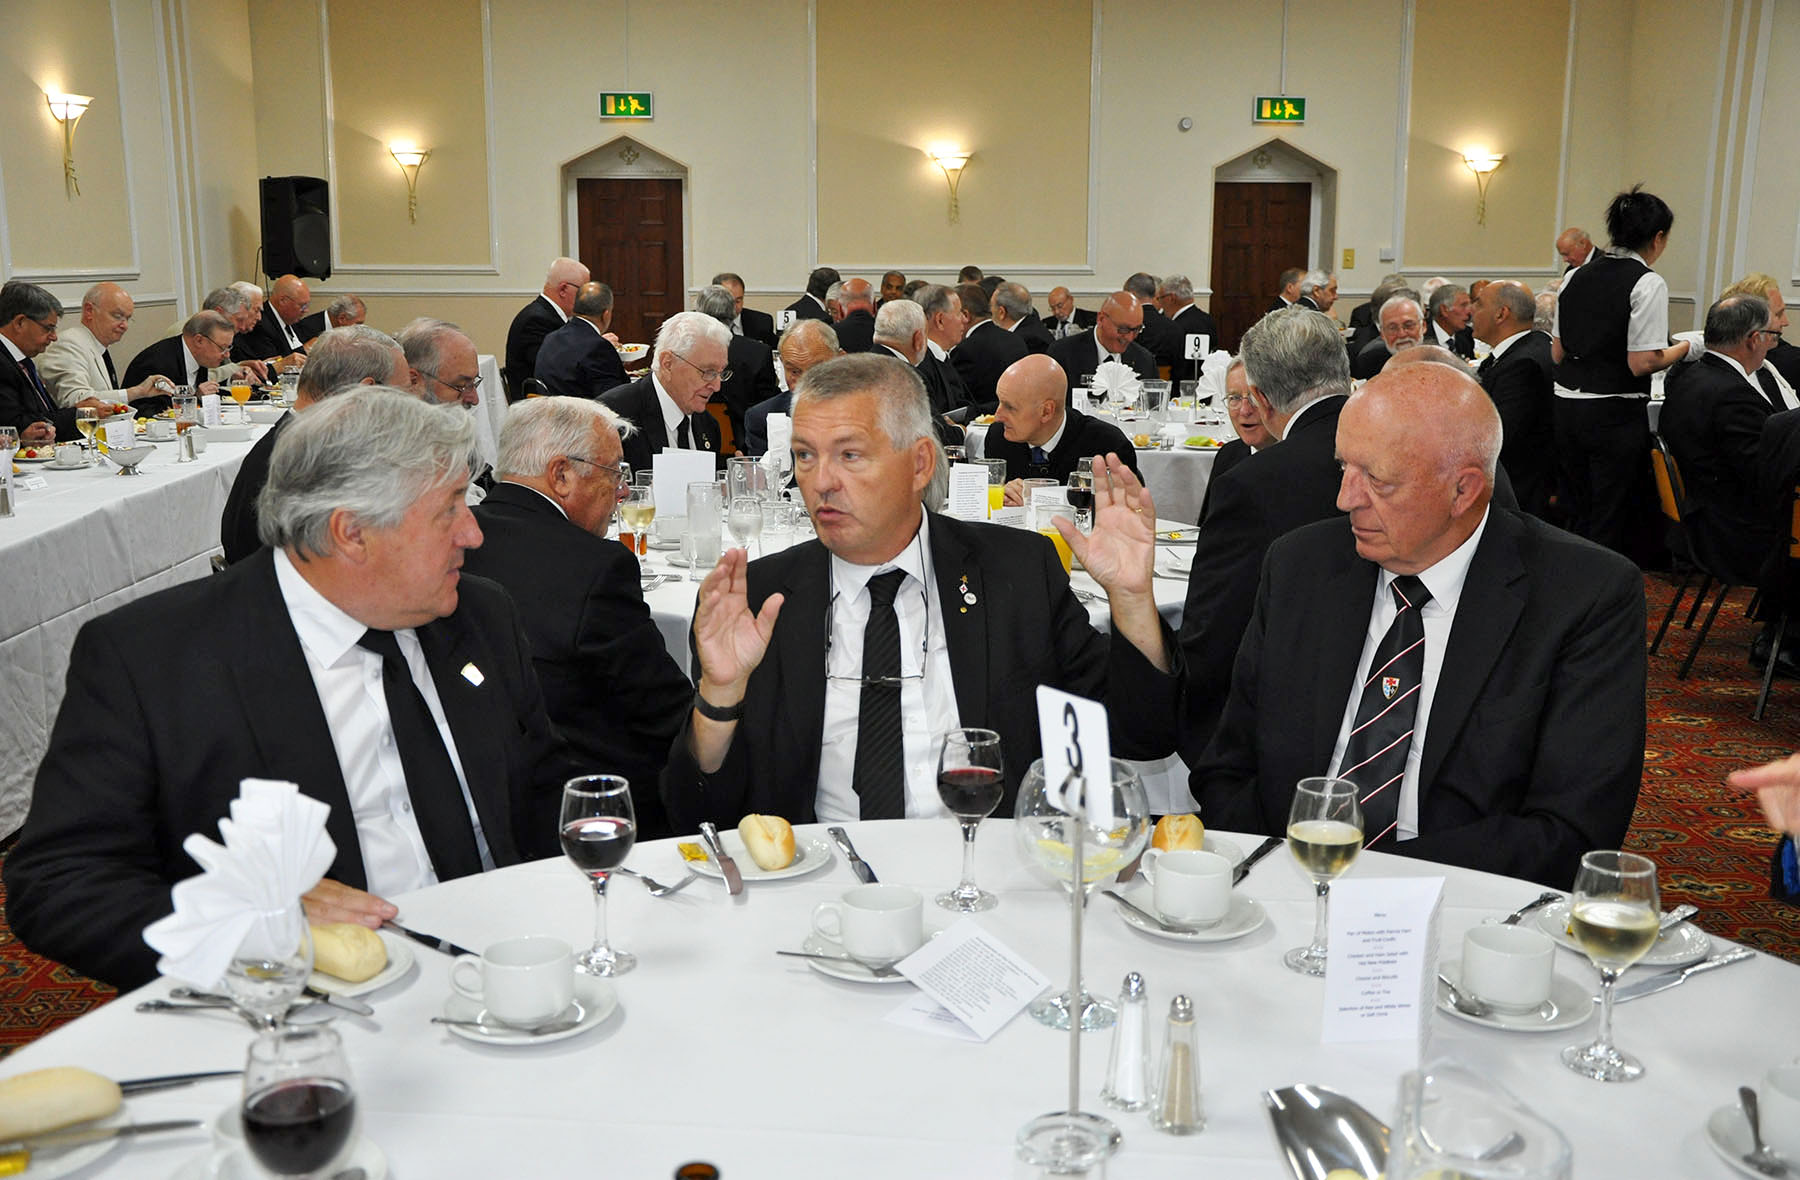 The 2018 Annual Meeting of the Provincial Priory of Surrey